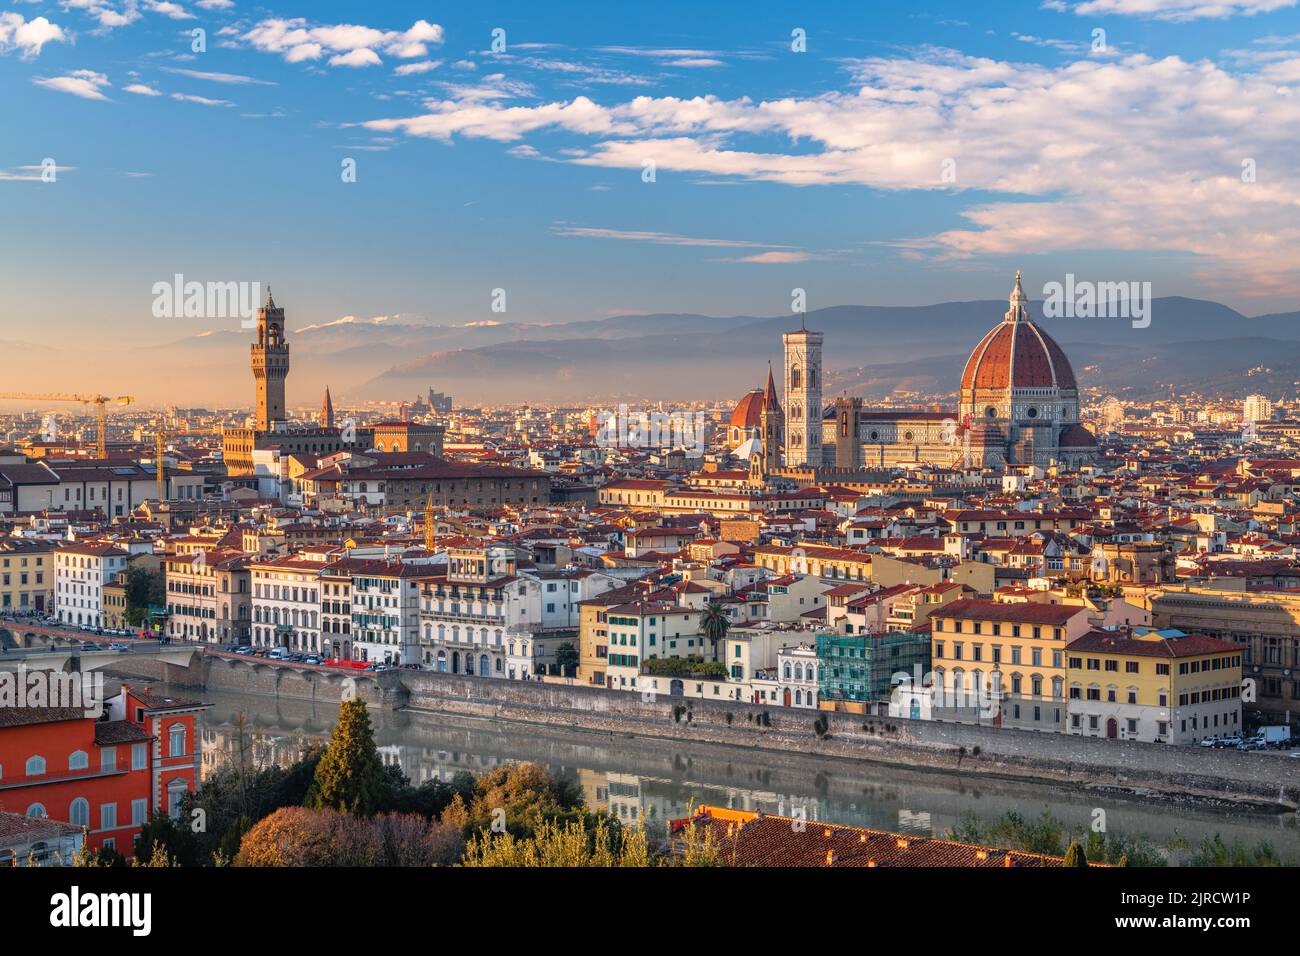 Florence, Italy historic city skyline in the afternoon. Stock Photo